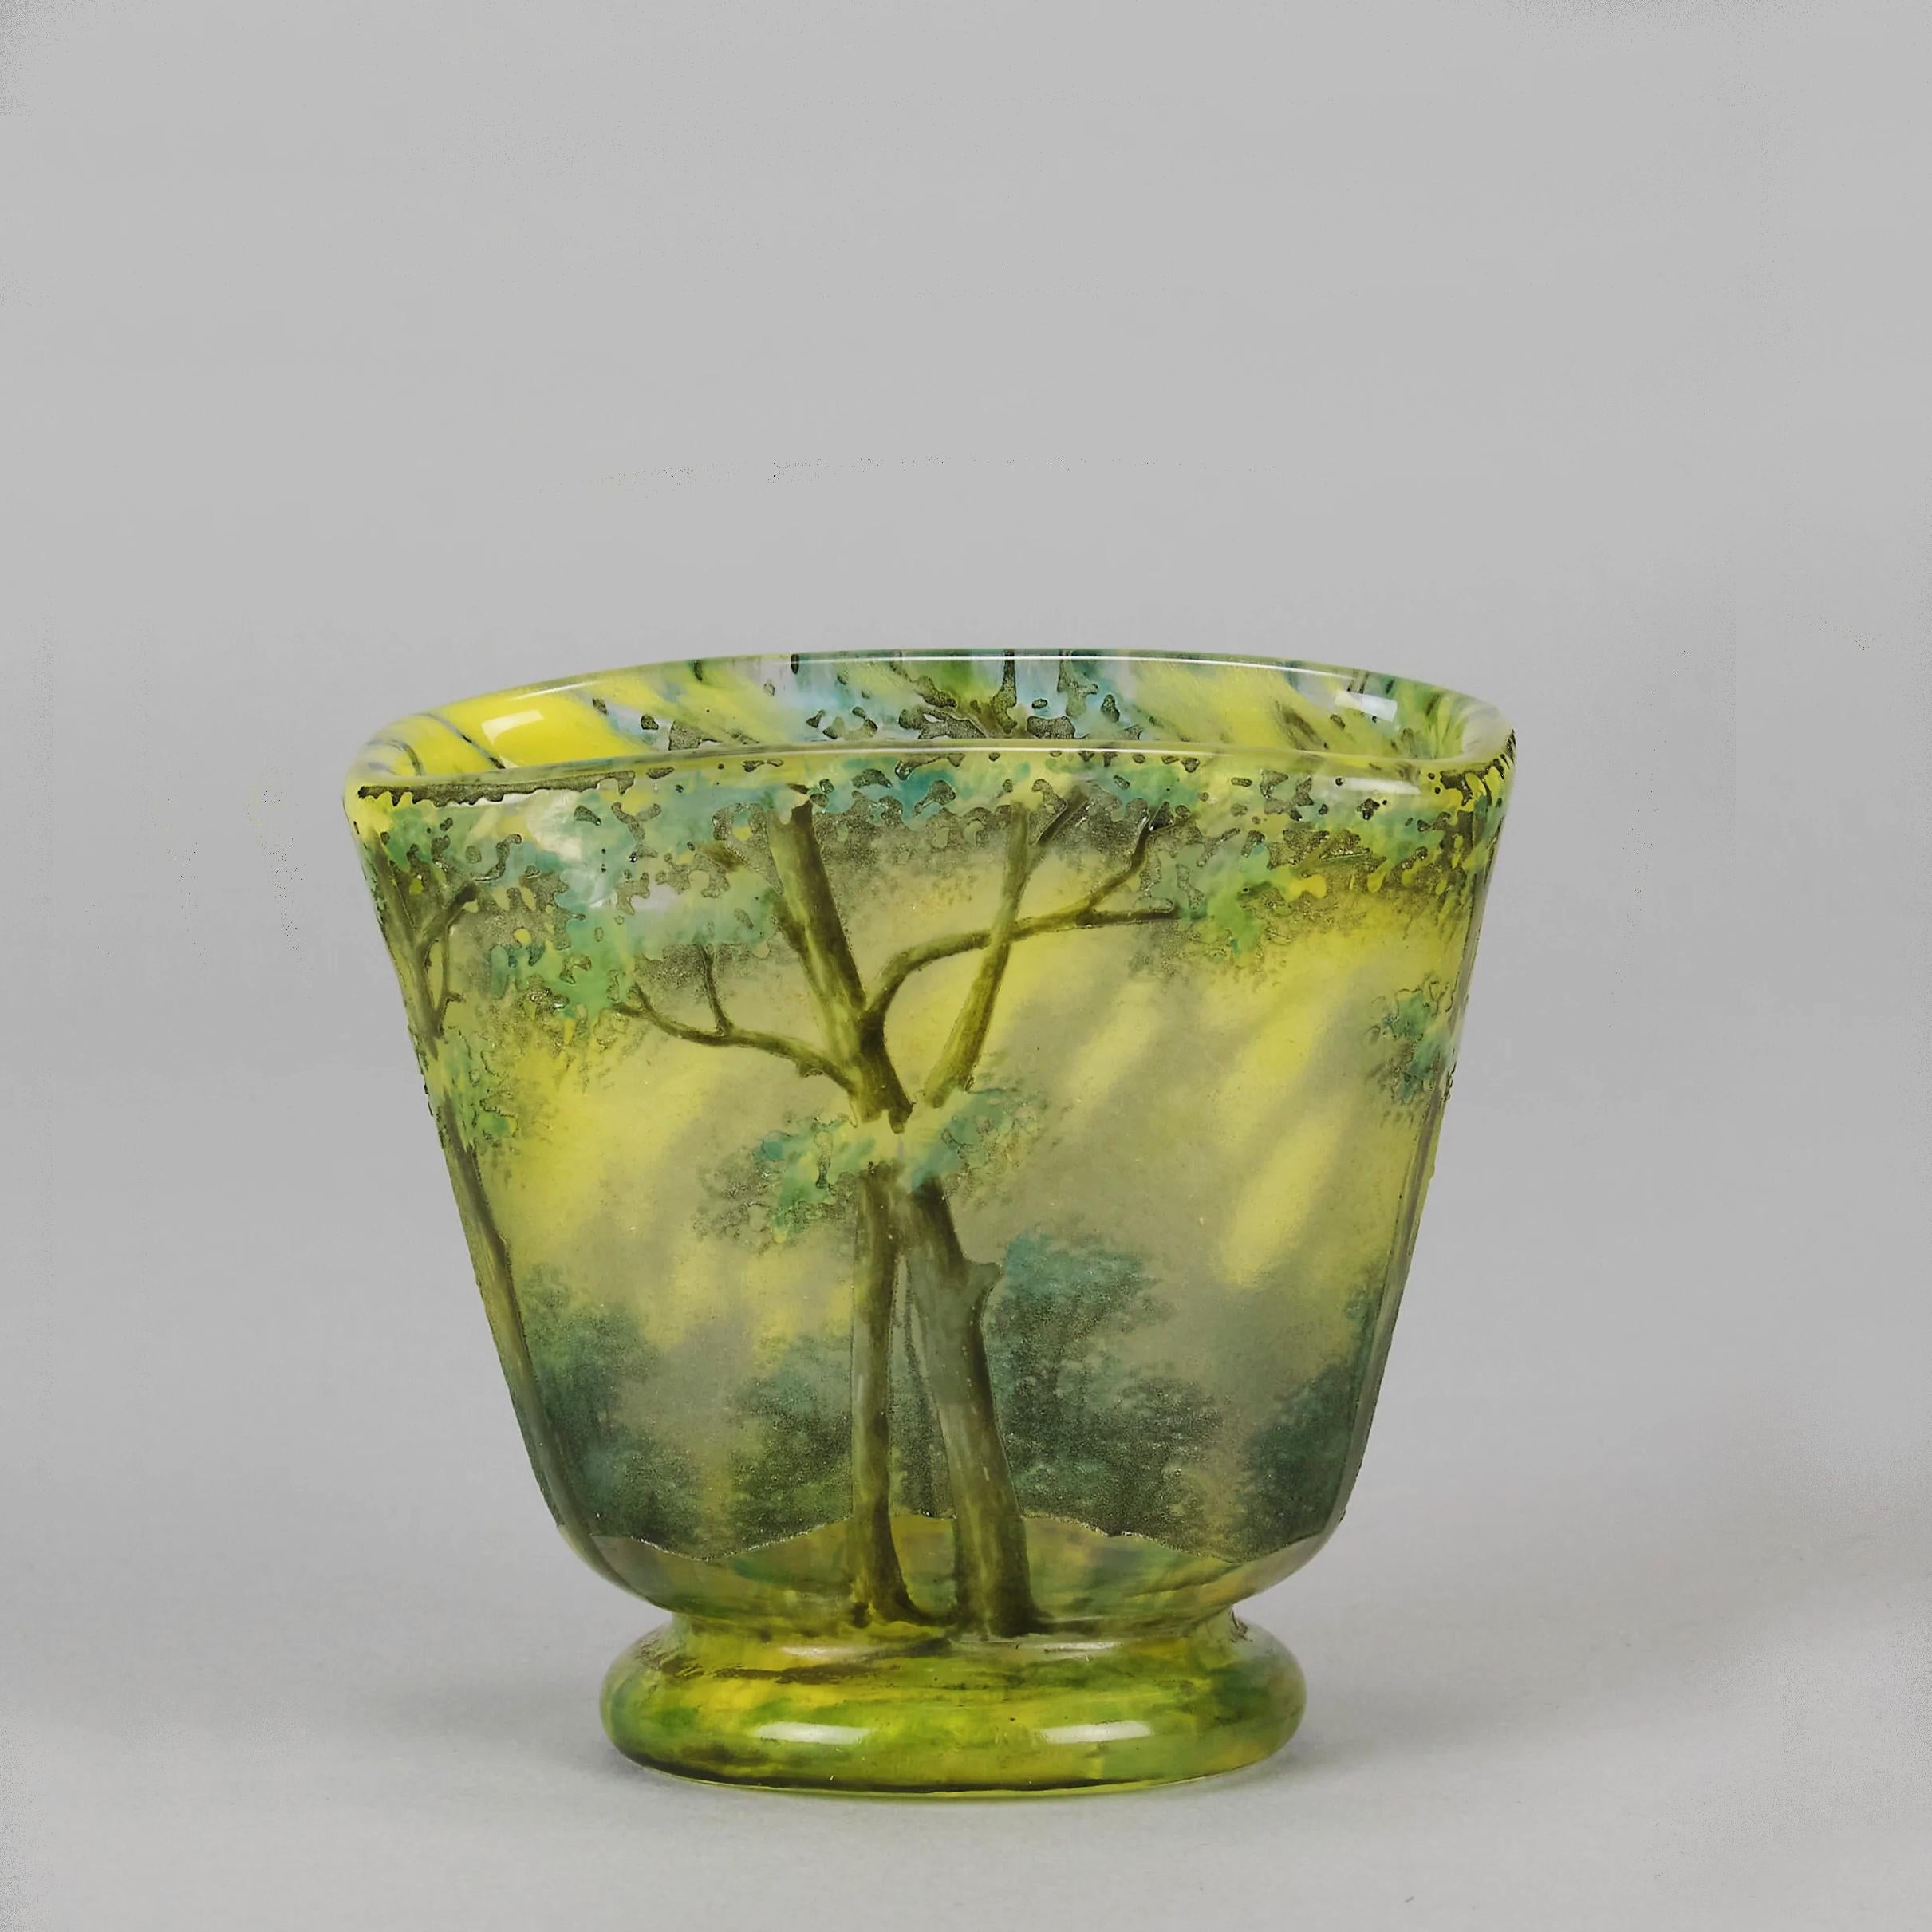 A beautiful early 20th century cameo glass vase etched and enamelled with a vibrant springtime wooded landscape, exhibiting very fine hand finised surface detail and beautiful deep inviting colour, signed to base Daum Nancy and with the Cross of